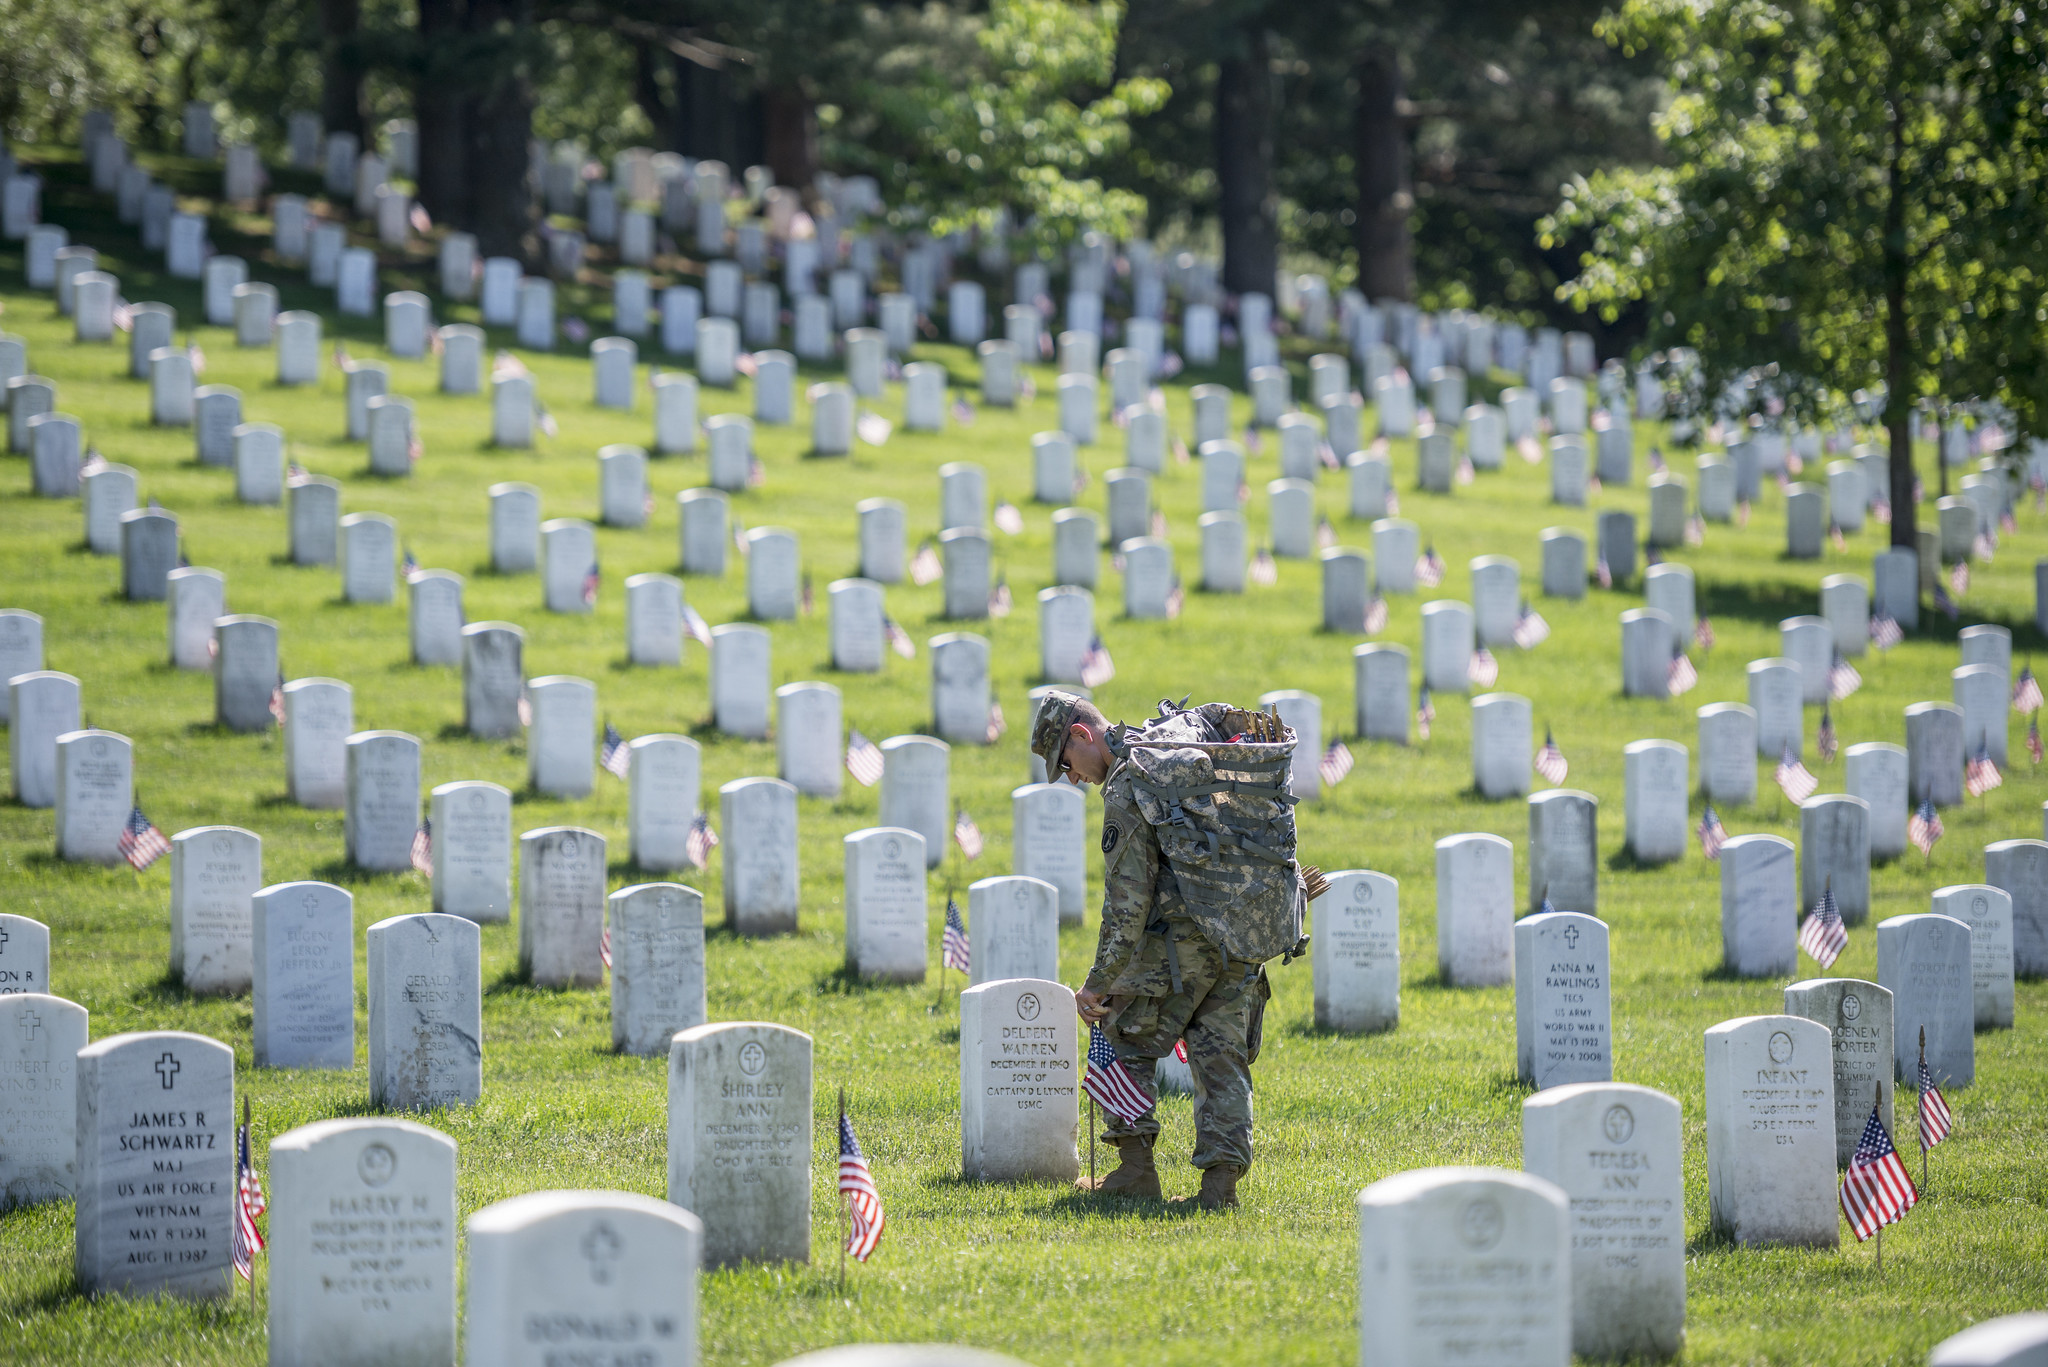 A uniformed soldier places American flags in front of gravesites at Arlington National Cemetery